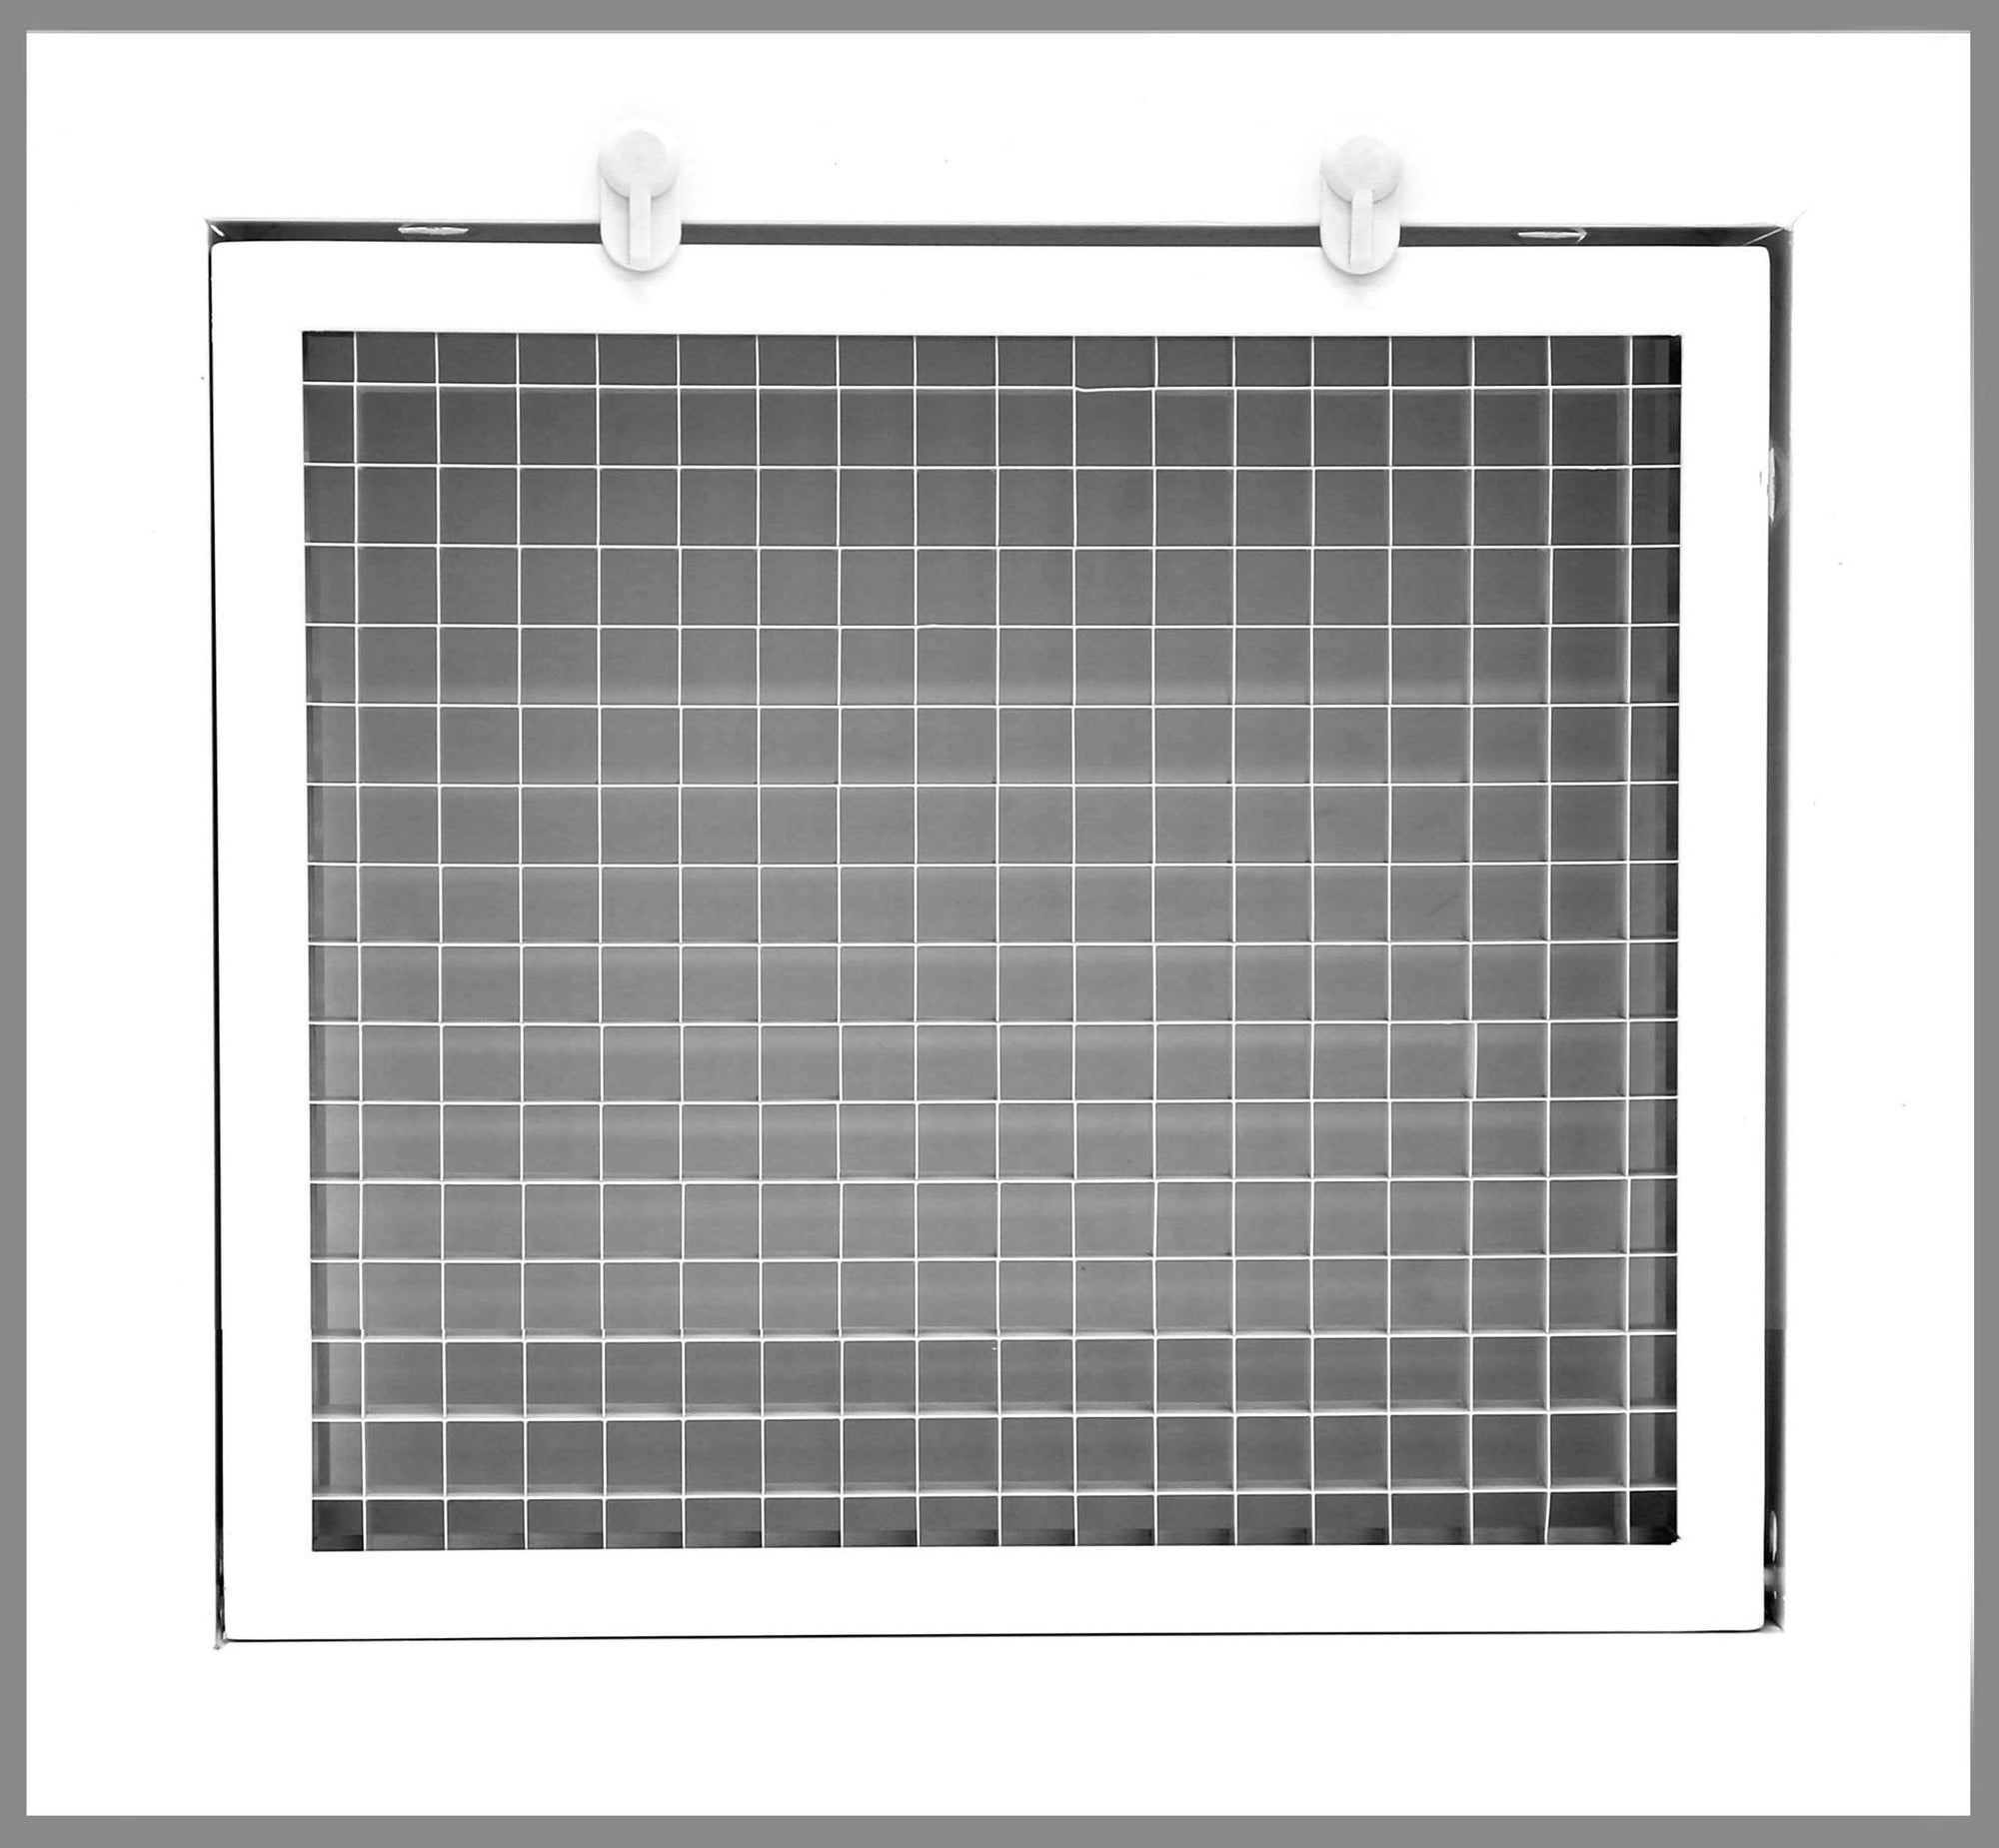 8" x 6" Cube Core Eggcrate Return Air Filter Grille for 1" Filter